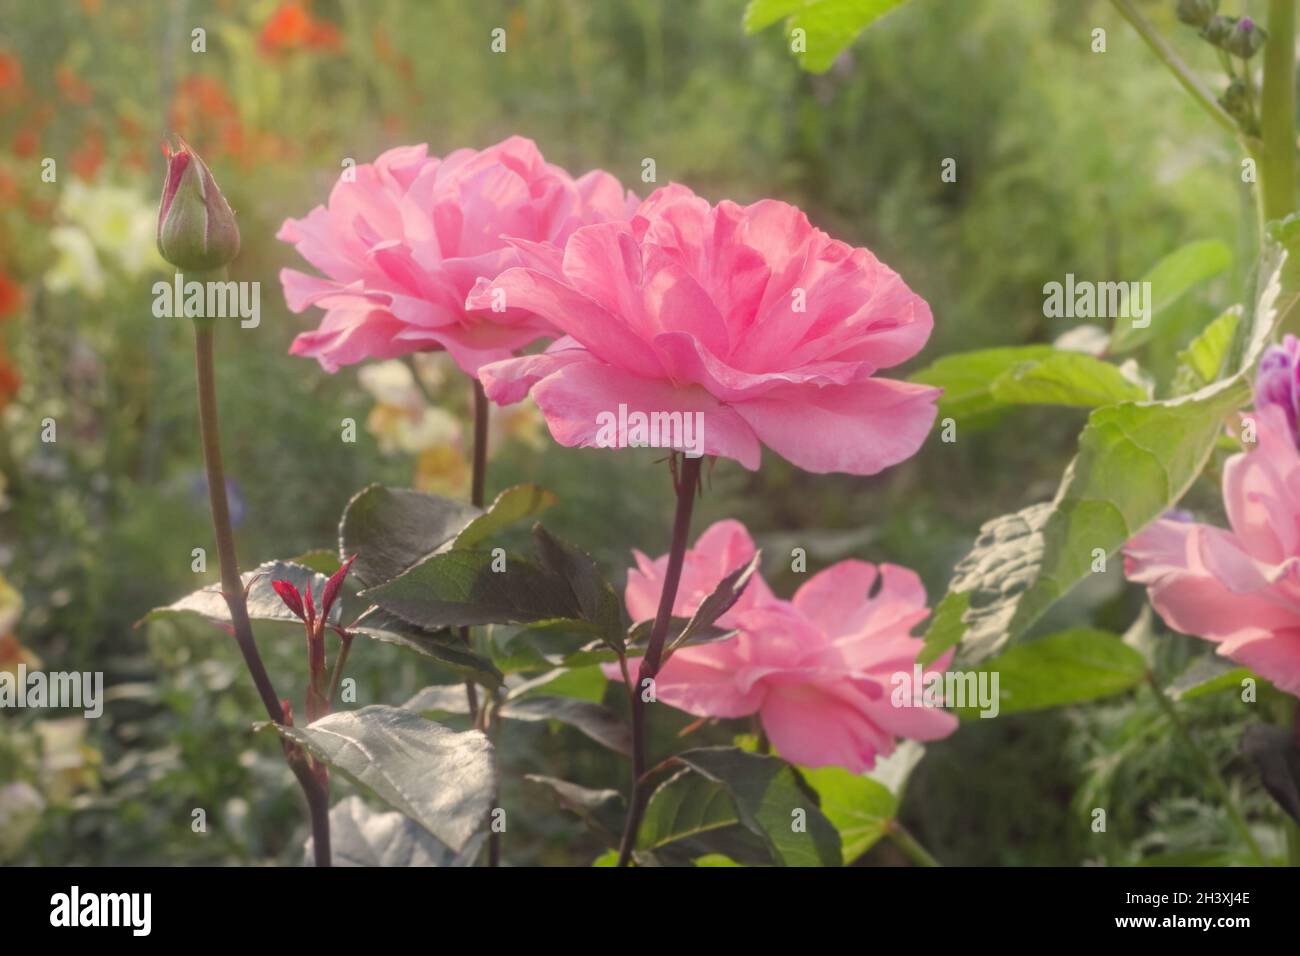 Chharming pink roses bloom in garden on soft summer day Stock Photo